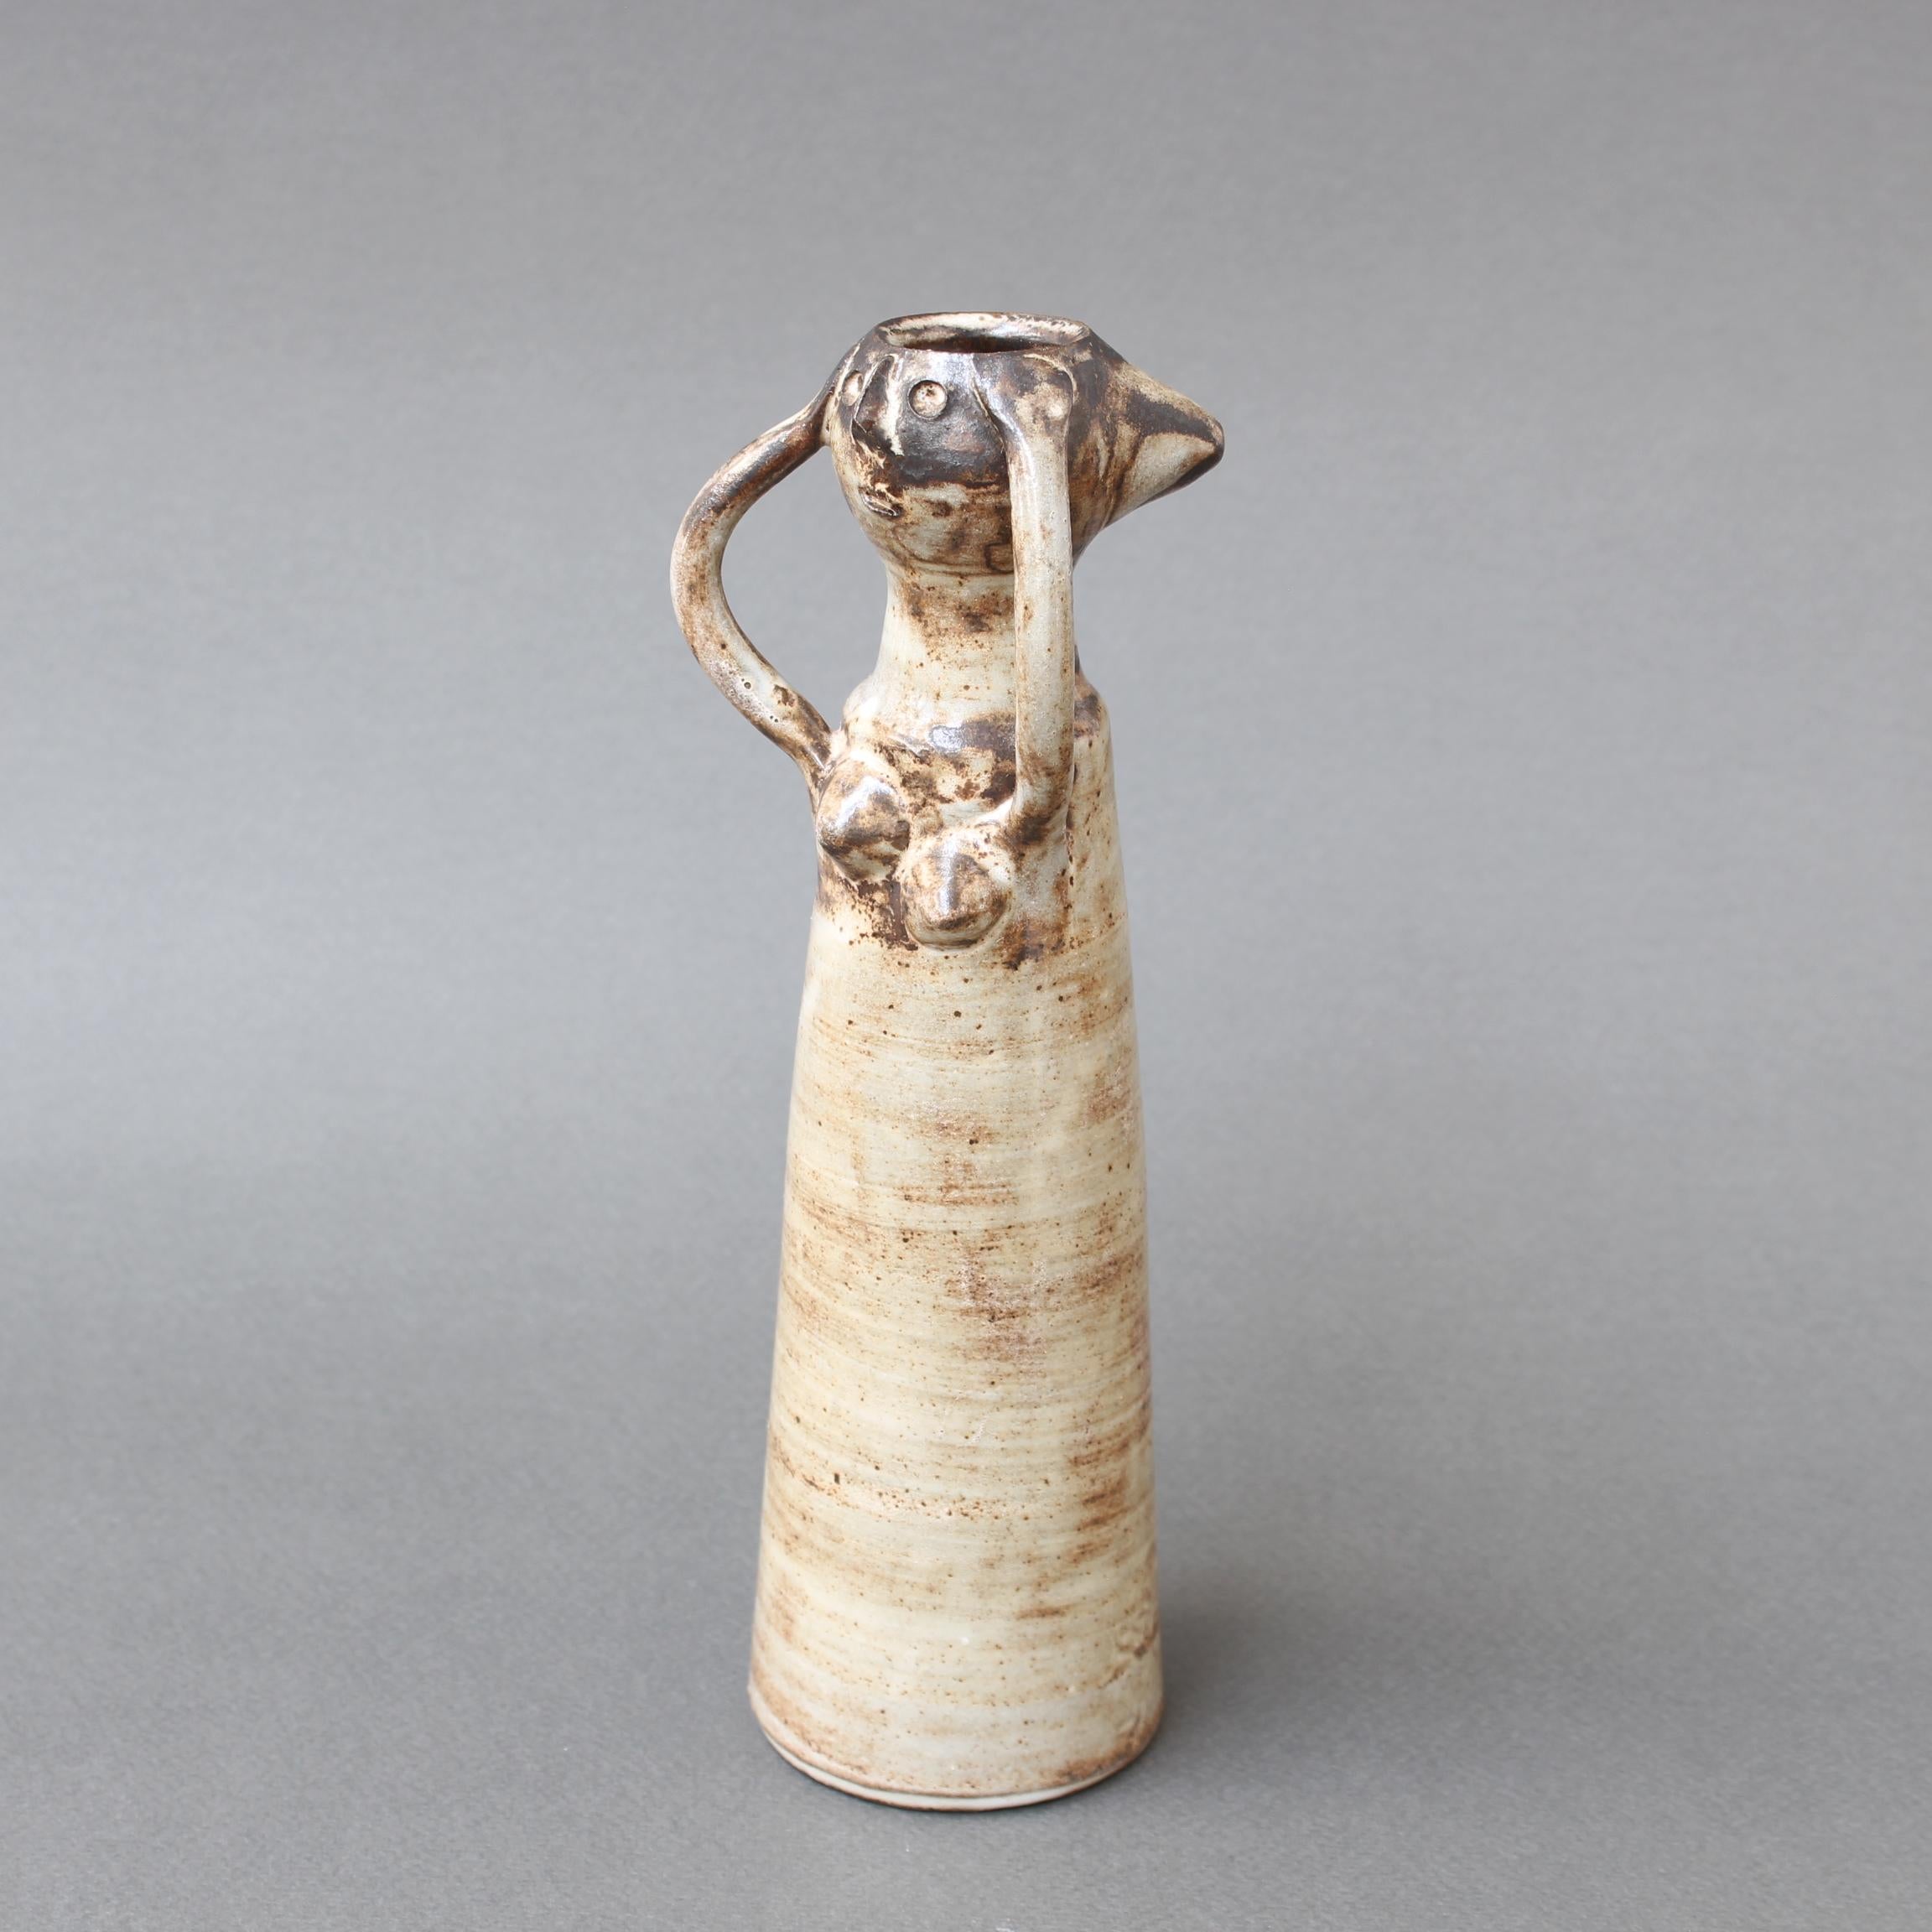 Glazed ceramic woman (circa 1960s) by Jacques Pouchain (1925-2005). This is a delightful, figurative art pottery vase modelled as a woman with her arms upraised and hands clutching the sides of her head. She has a conical wheel thrown body,